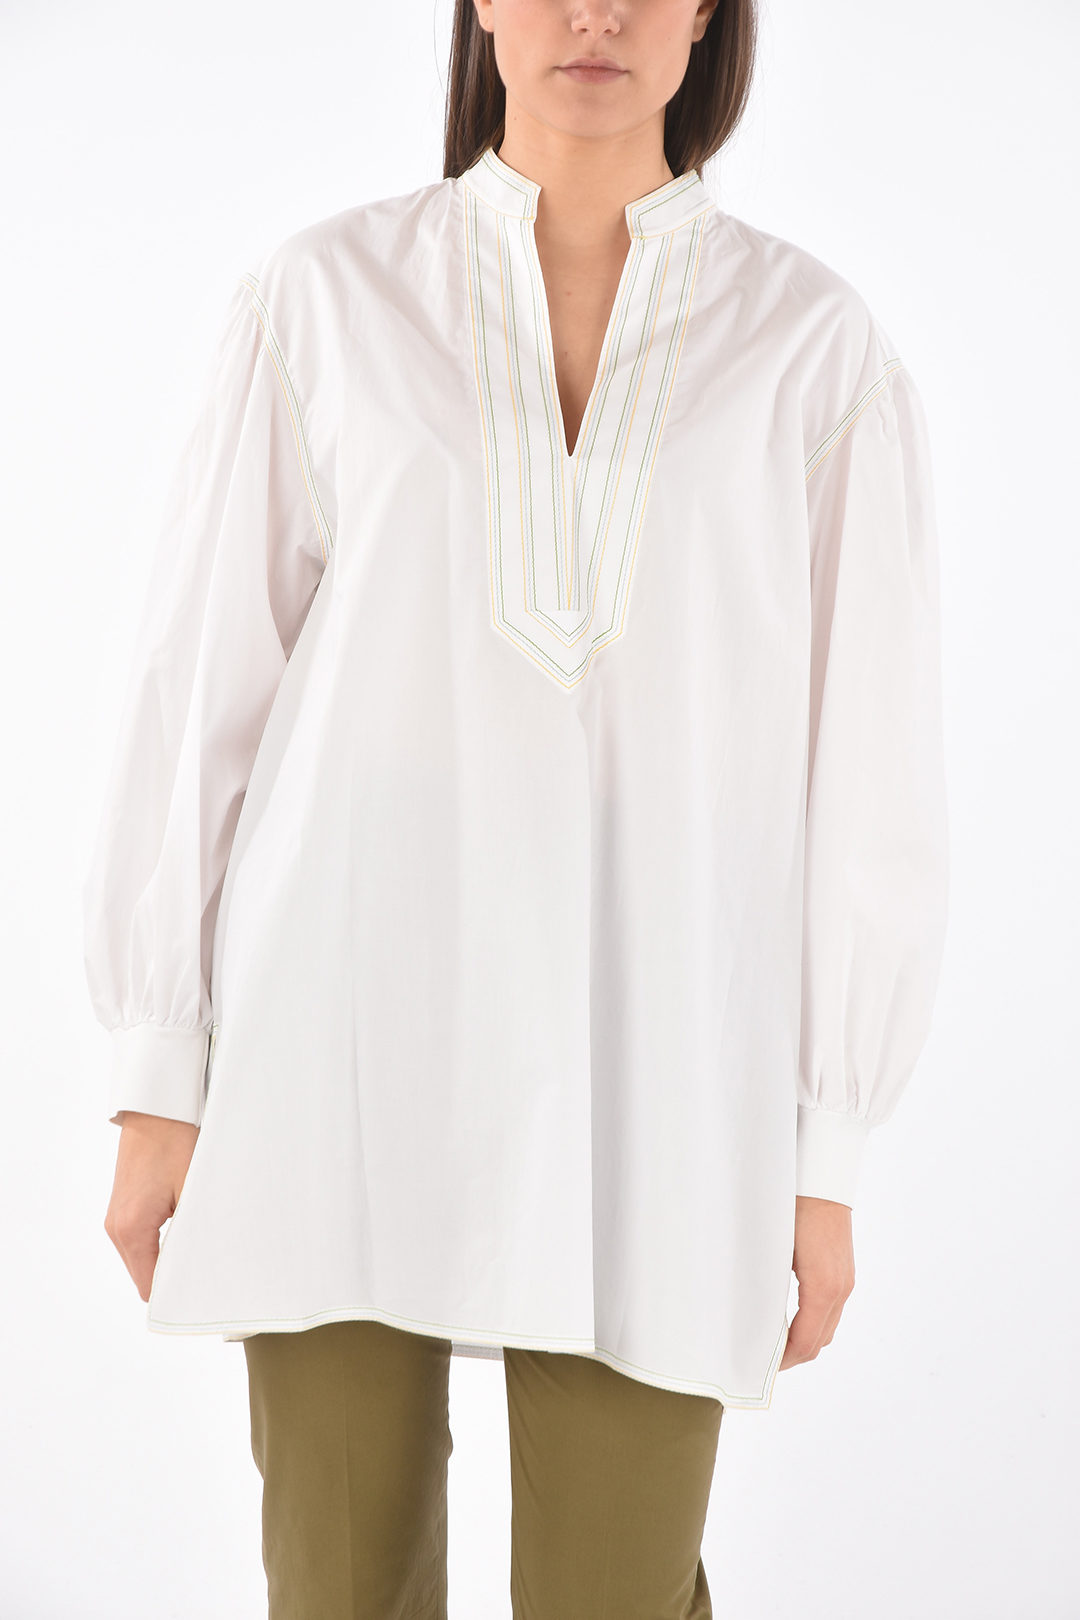 Tory Burch Puffed-sleeve Embroidered Cotton Tunic women - Glamood Outlet